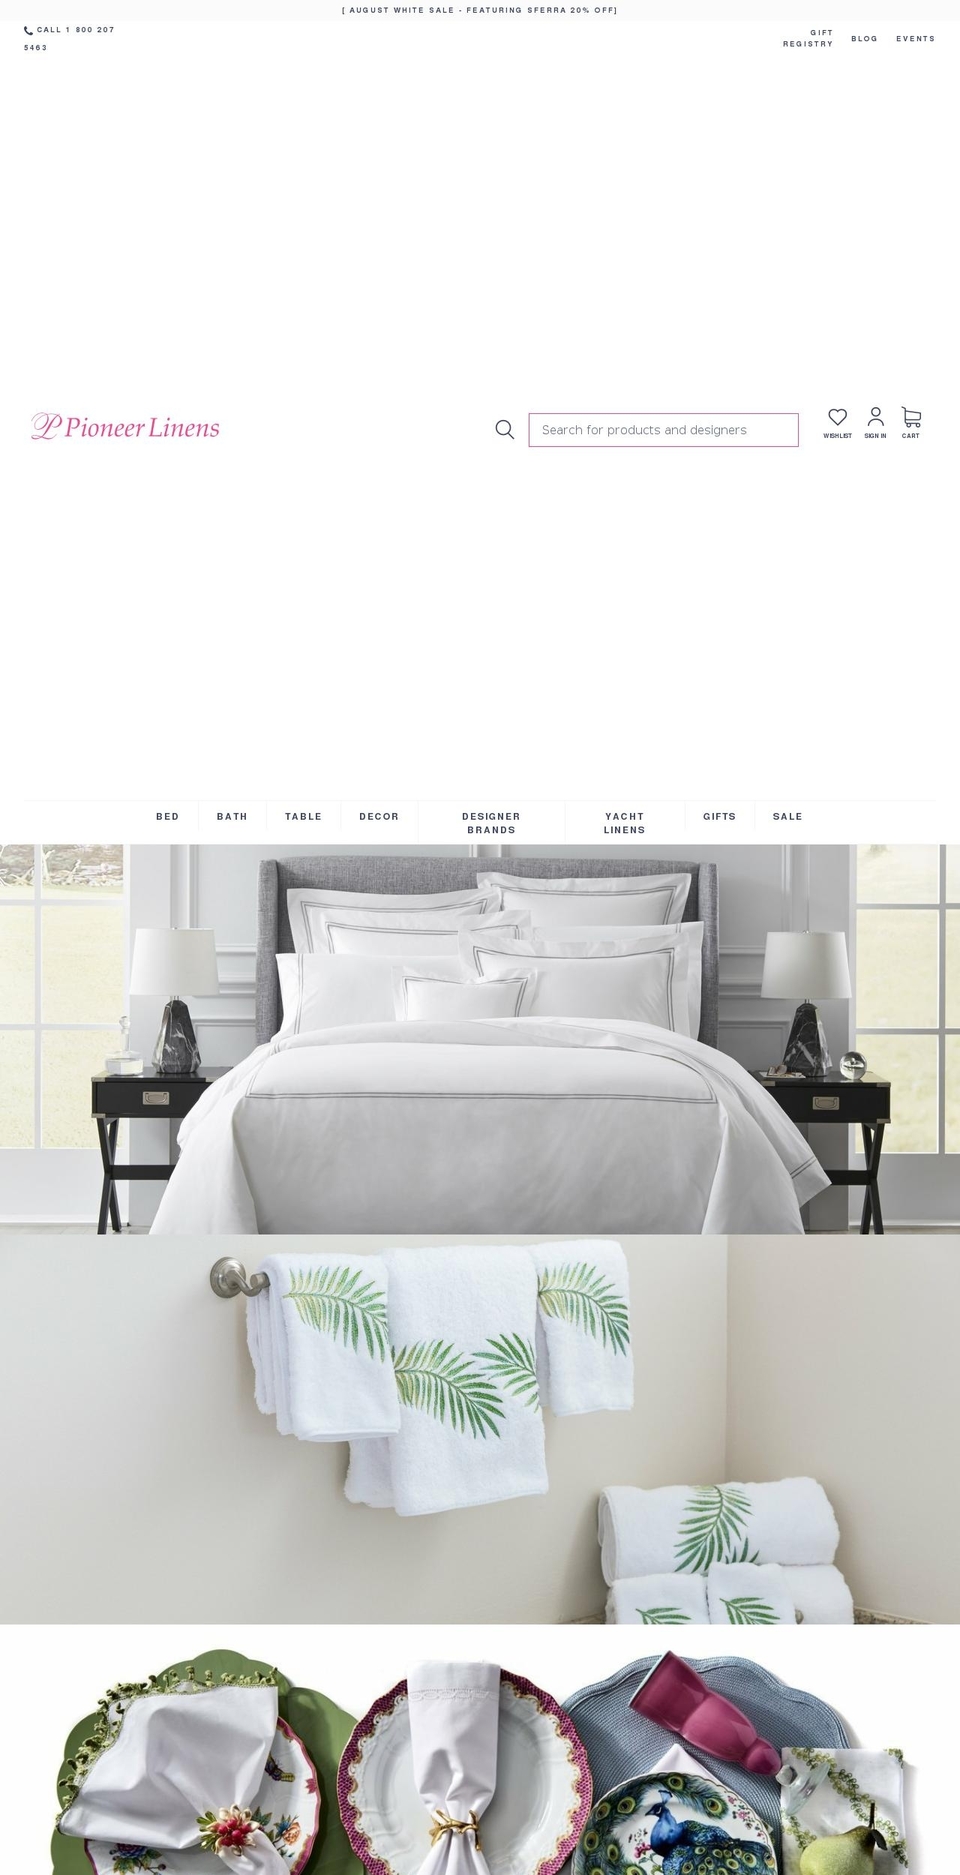 Buko Shopify Theme - Products Consolidation Shopify theme site example crew-linens.com